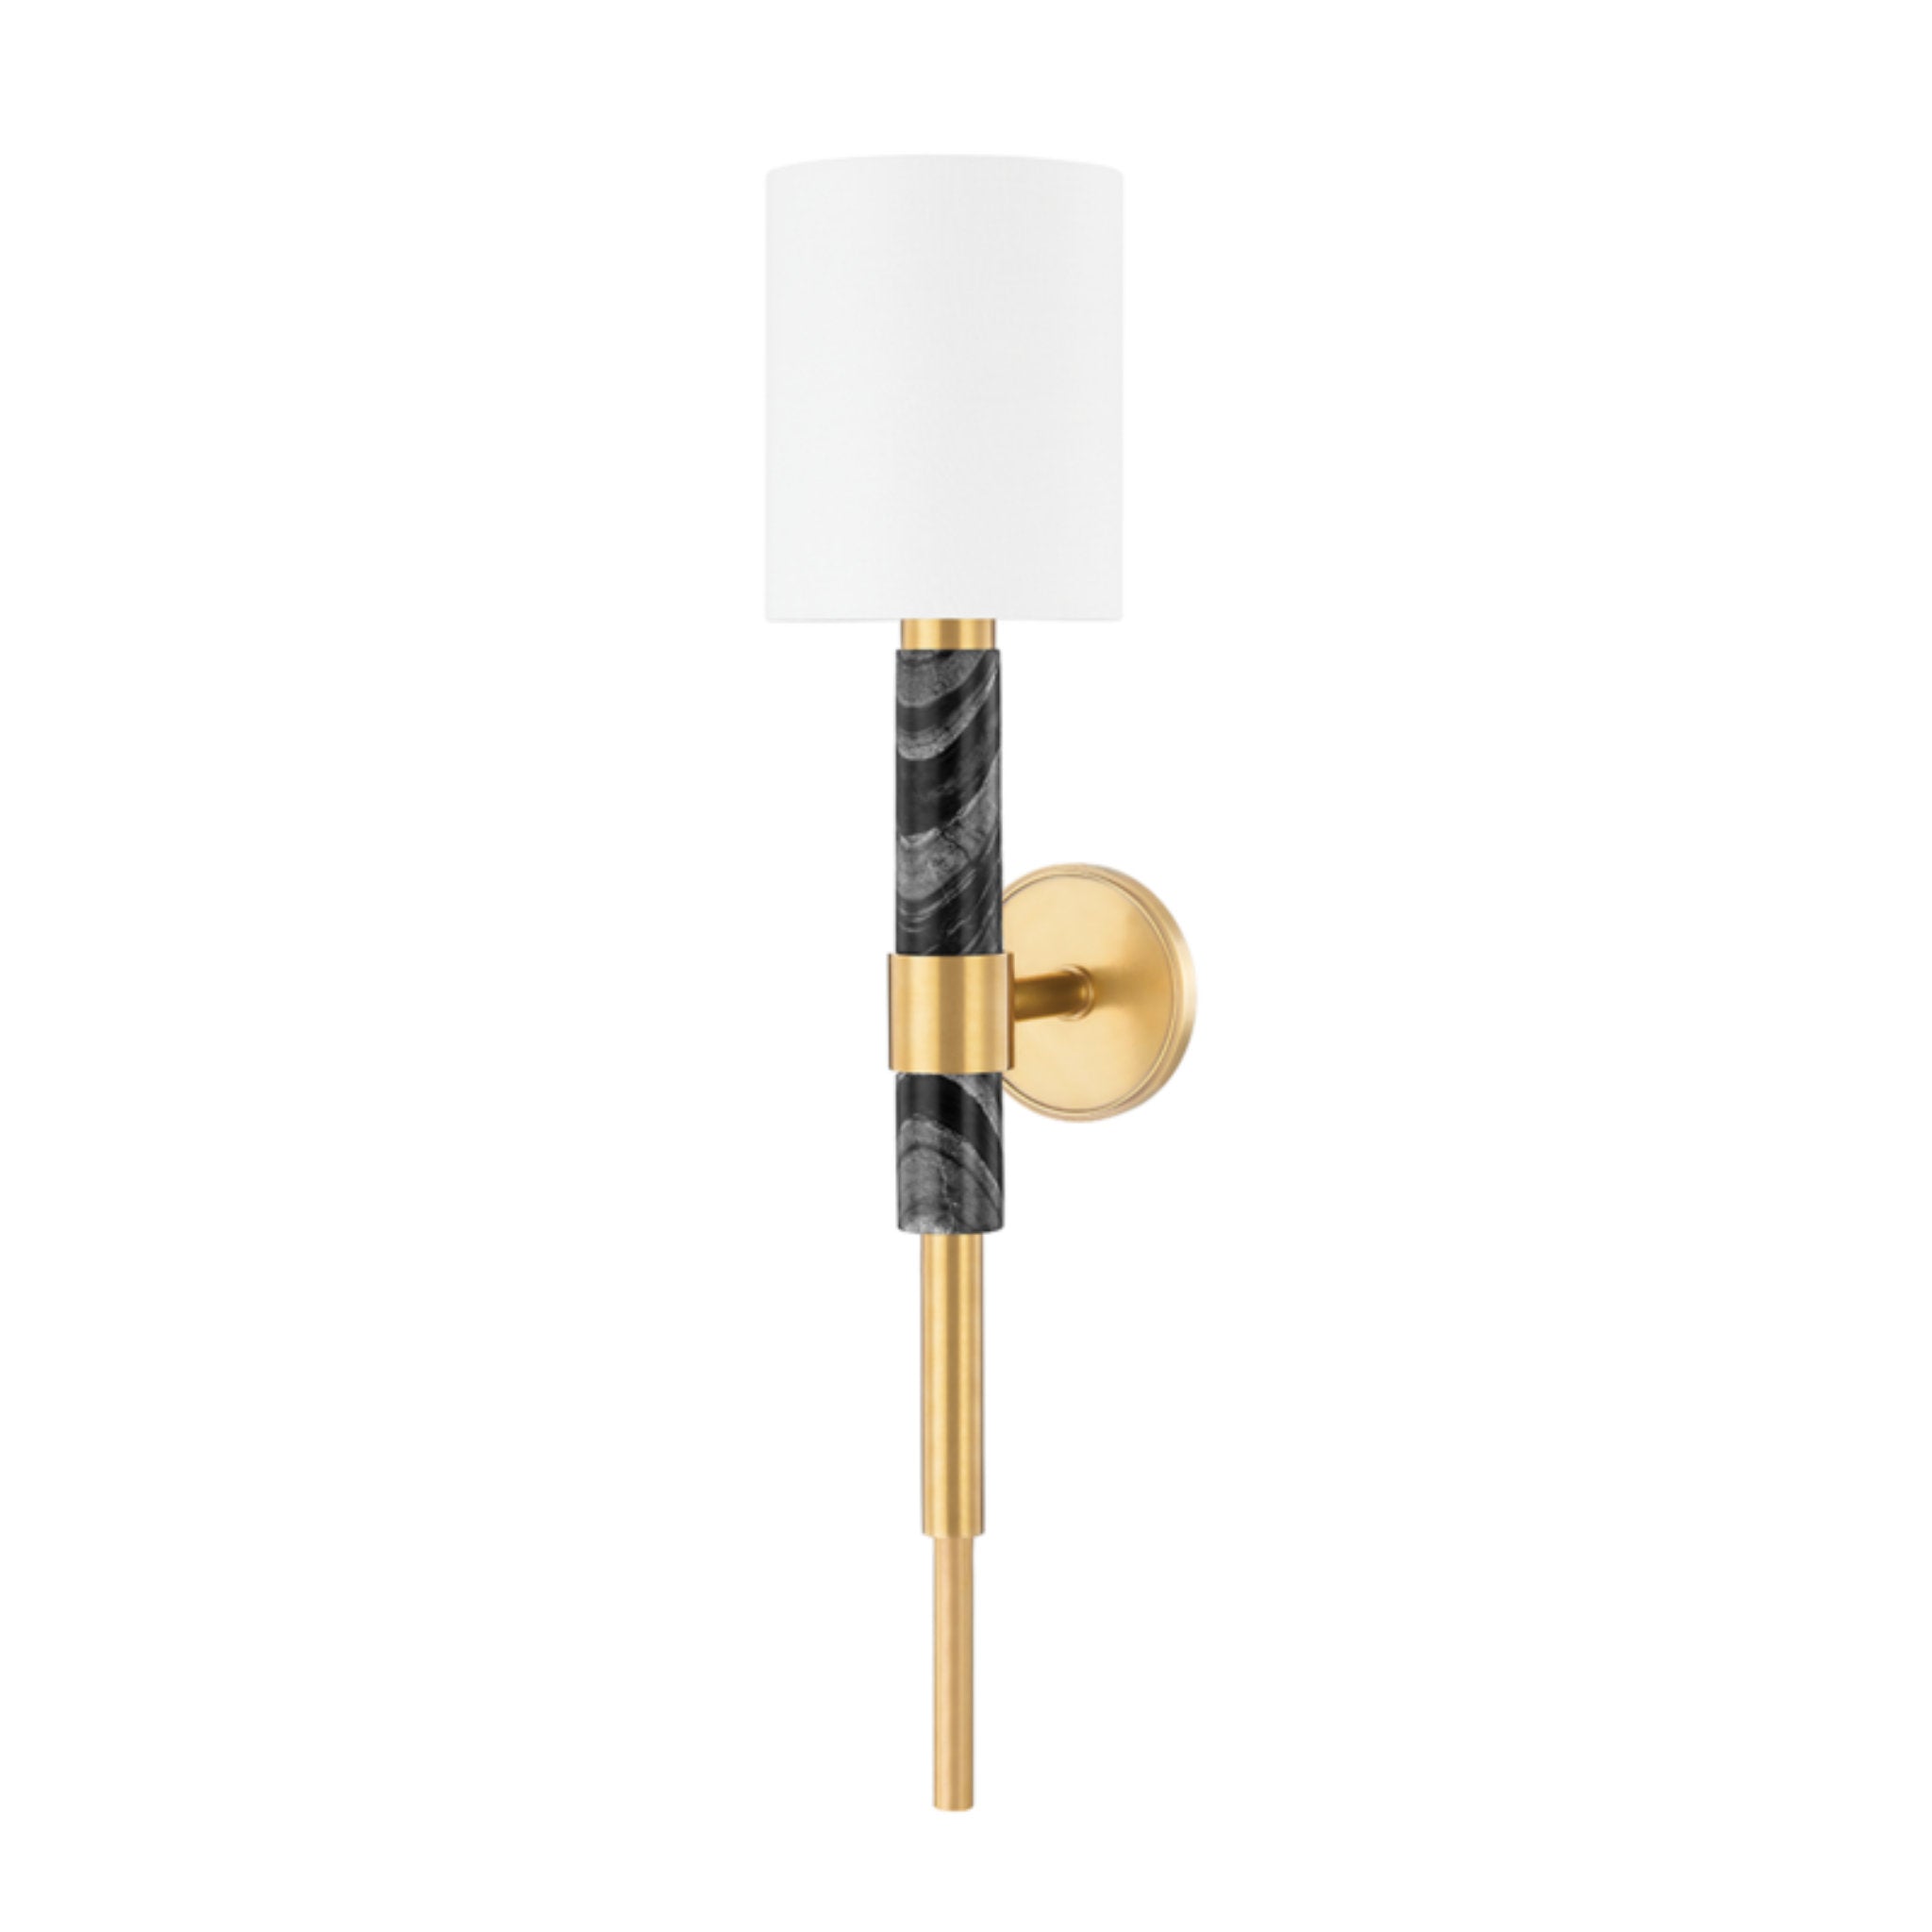 Solstice 1 Light Wall Sconce in Vintage Brass & Black Marble